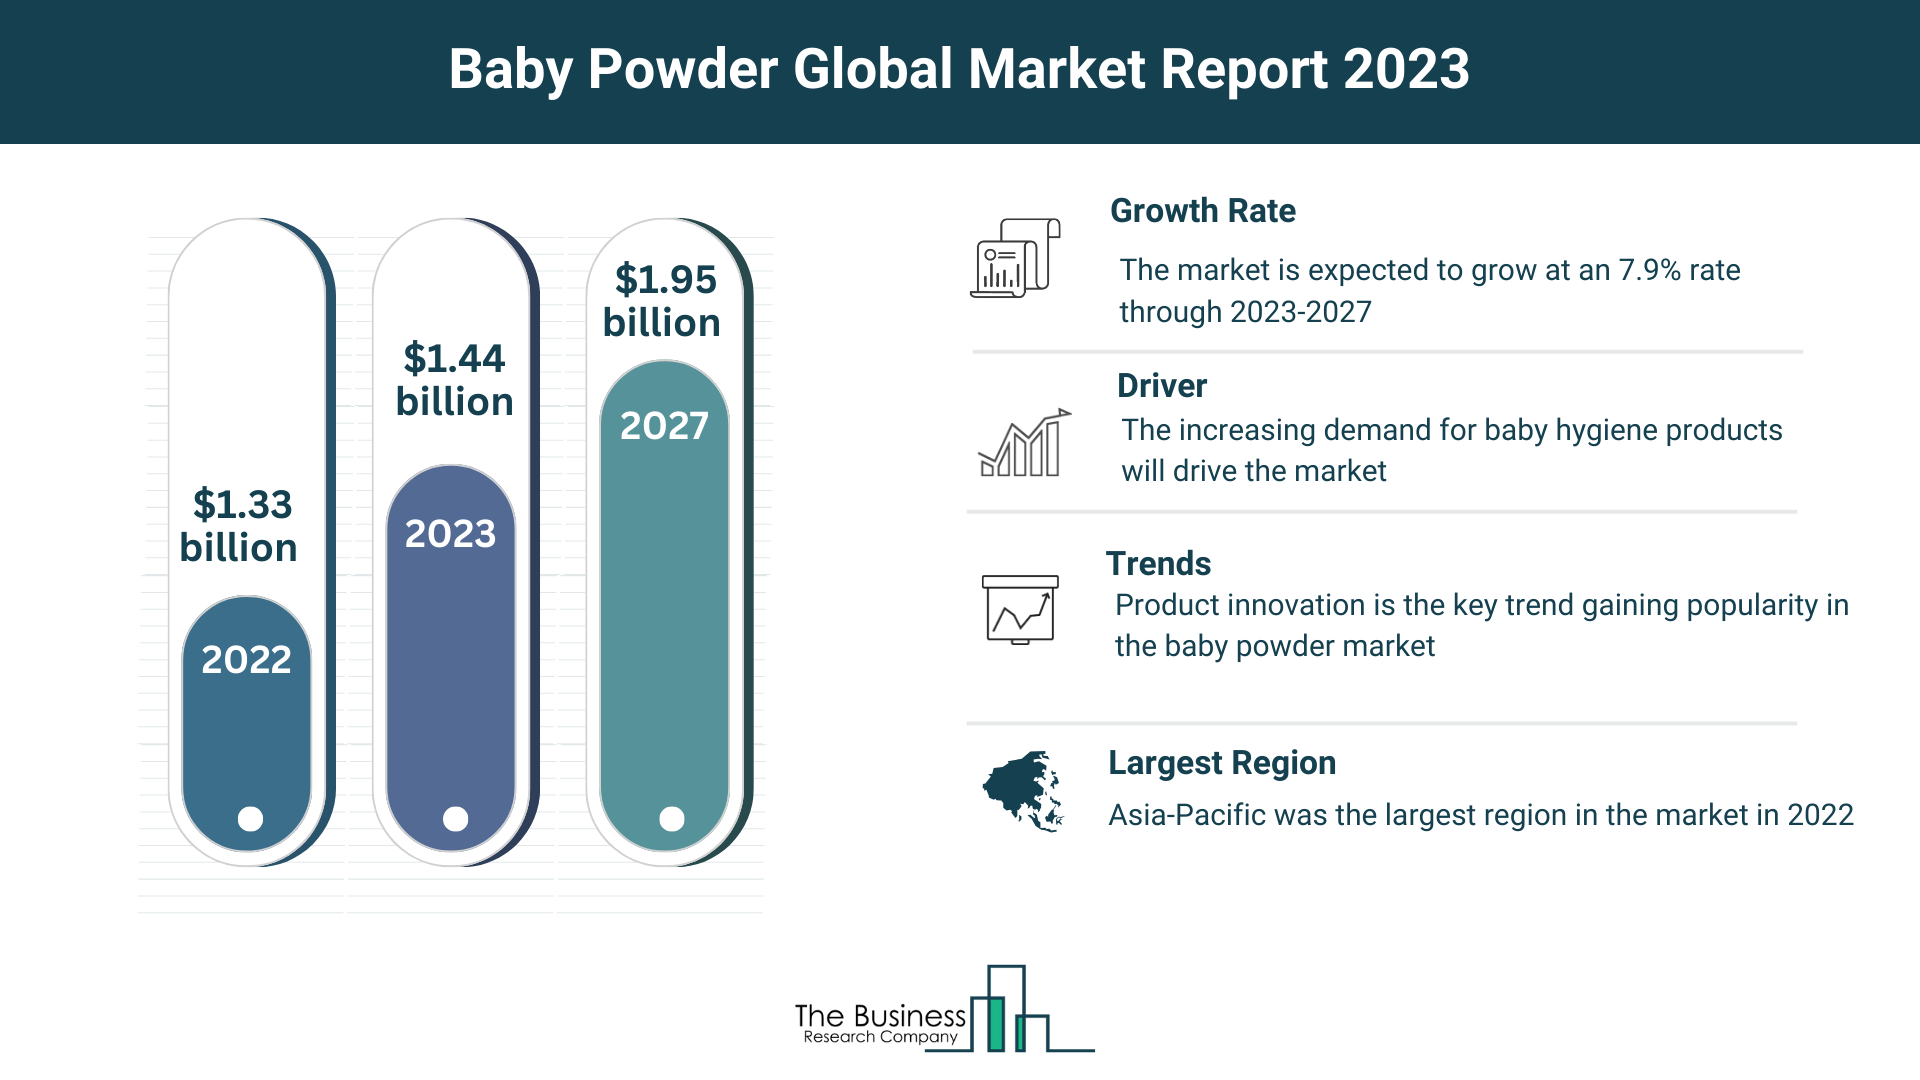 How Is the Baby Powder Market Expected To Grow Through 2023-2032?